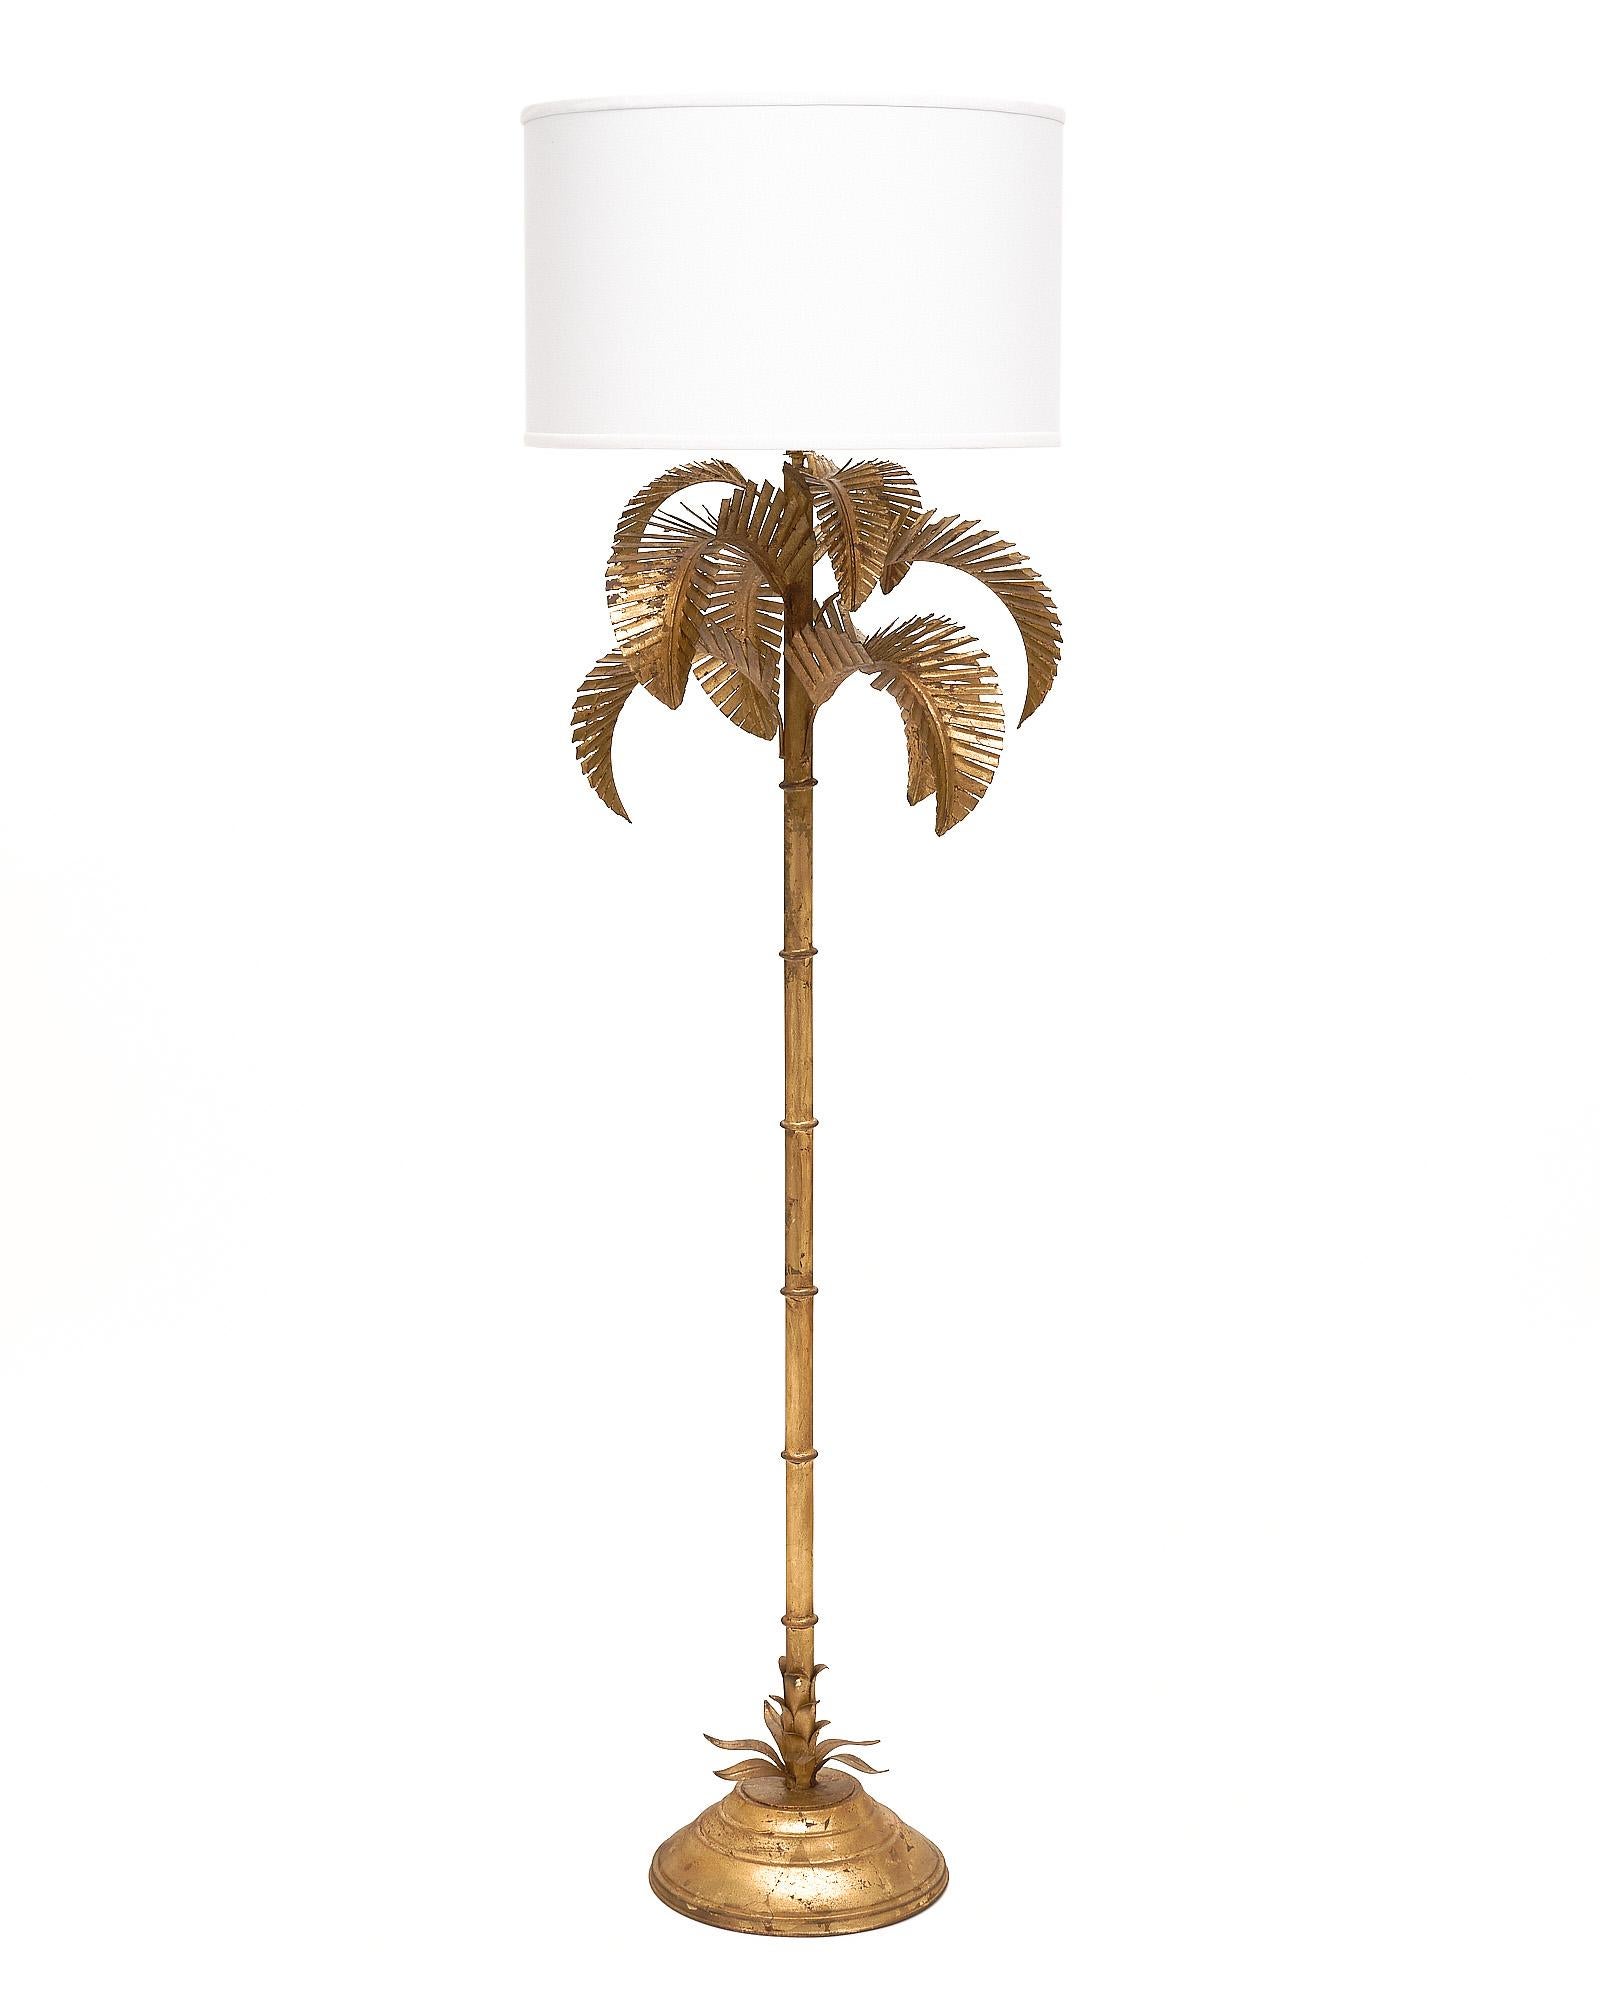 Vintage floor lamp finished with gold leaf in the form of a palm tree. It has been newly wired to fit US standards.